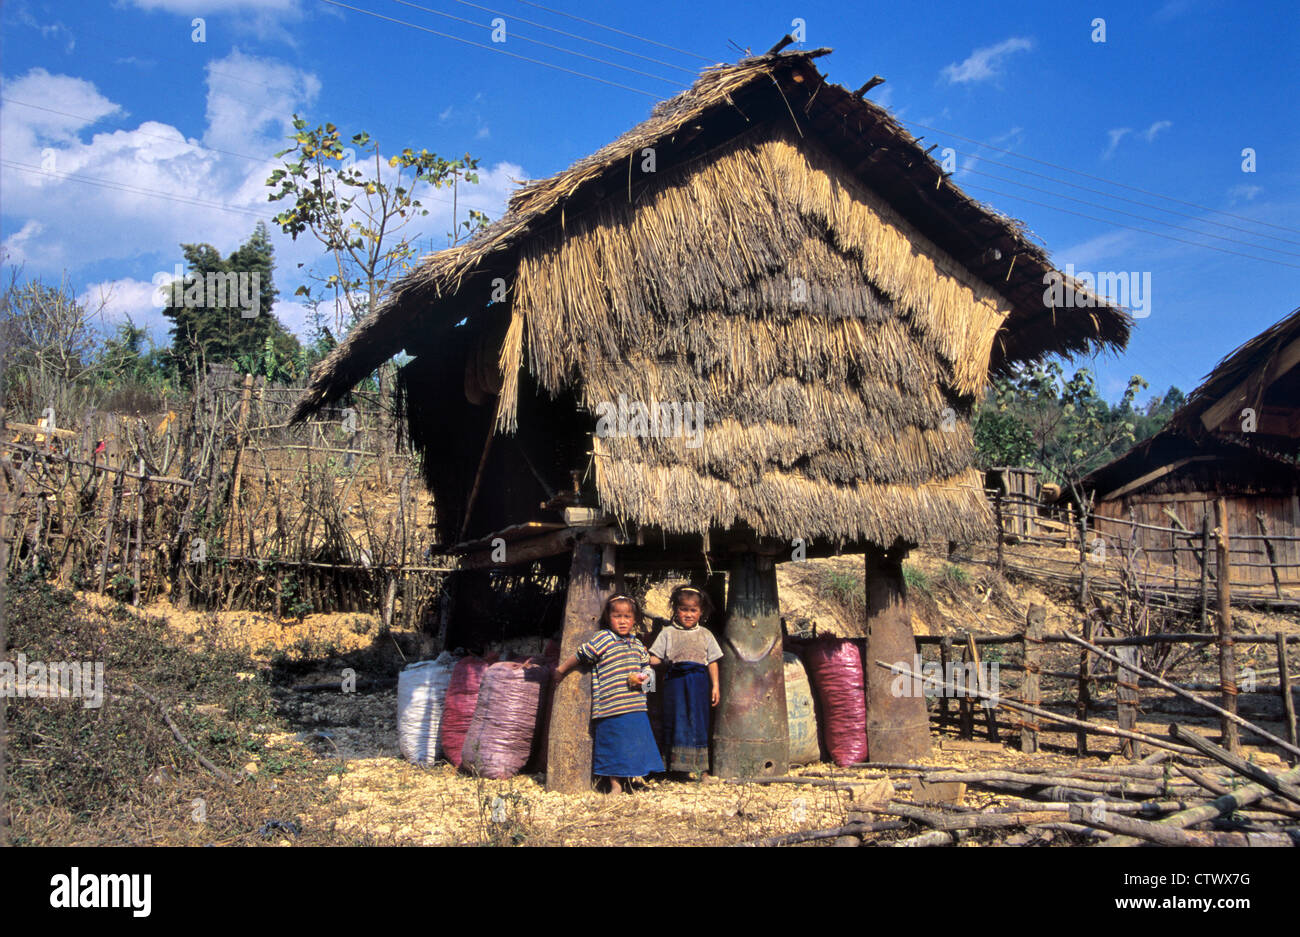 Laotian Sisters Pose next to a Thatched Rice Store or Agricultural Building Raised on Recycled Cluster Bombs or Metal War Waste near Phonsavan Laos Stock Photo